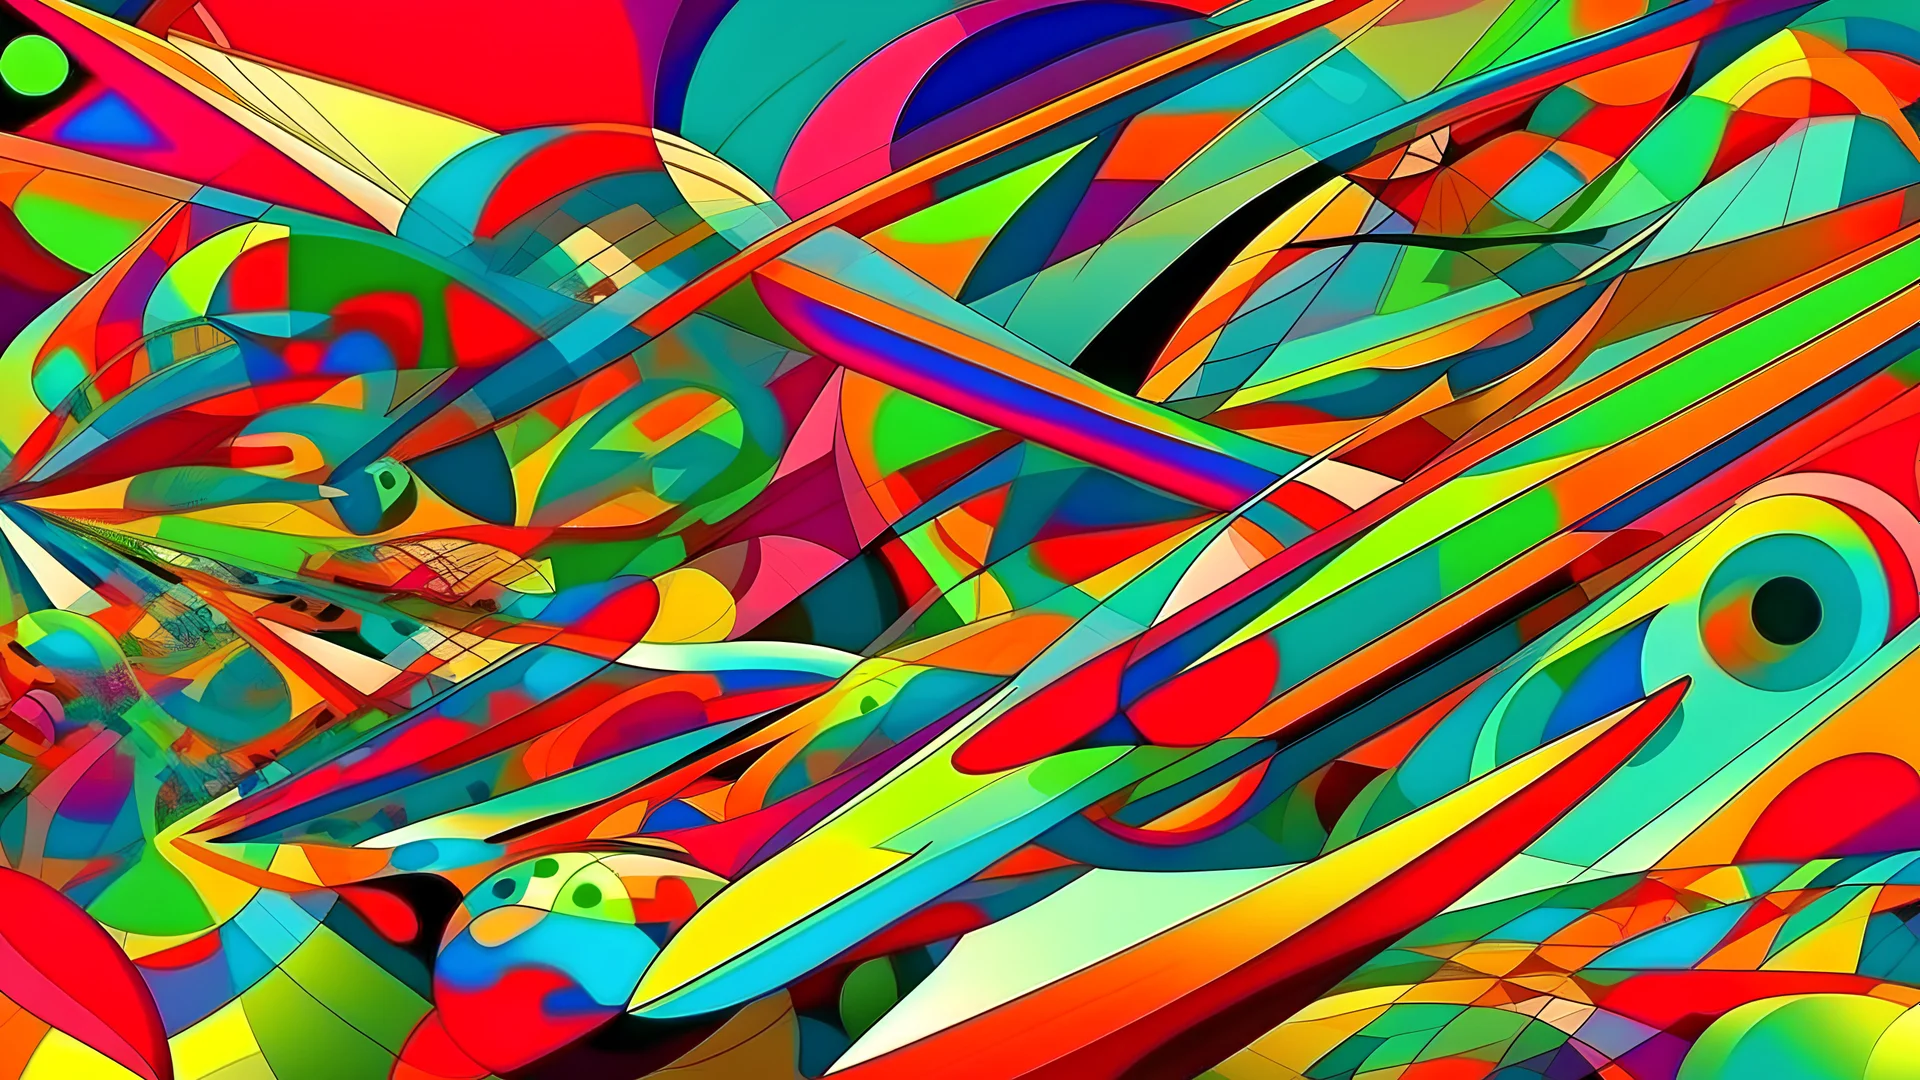 Abstrarsection of planes Psychedelic pattern By Alex